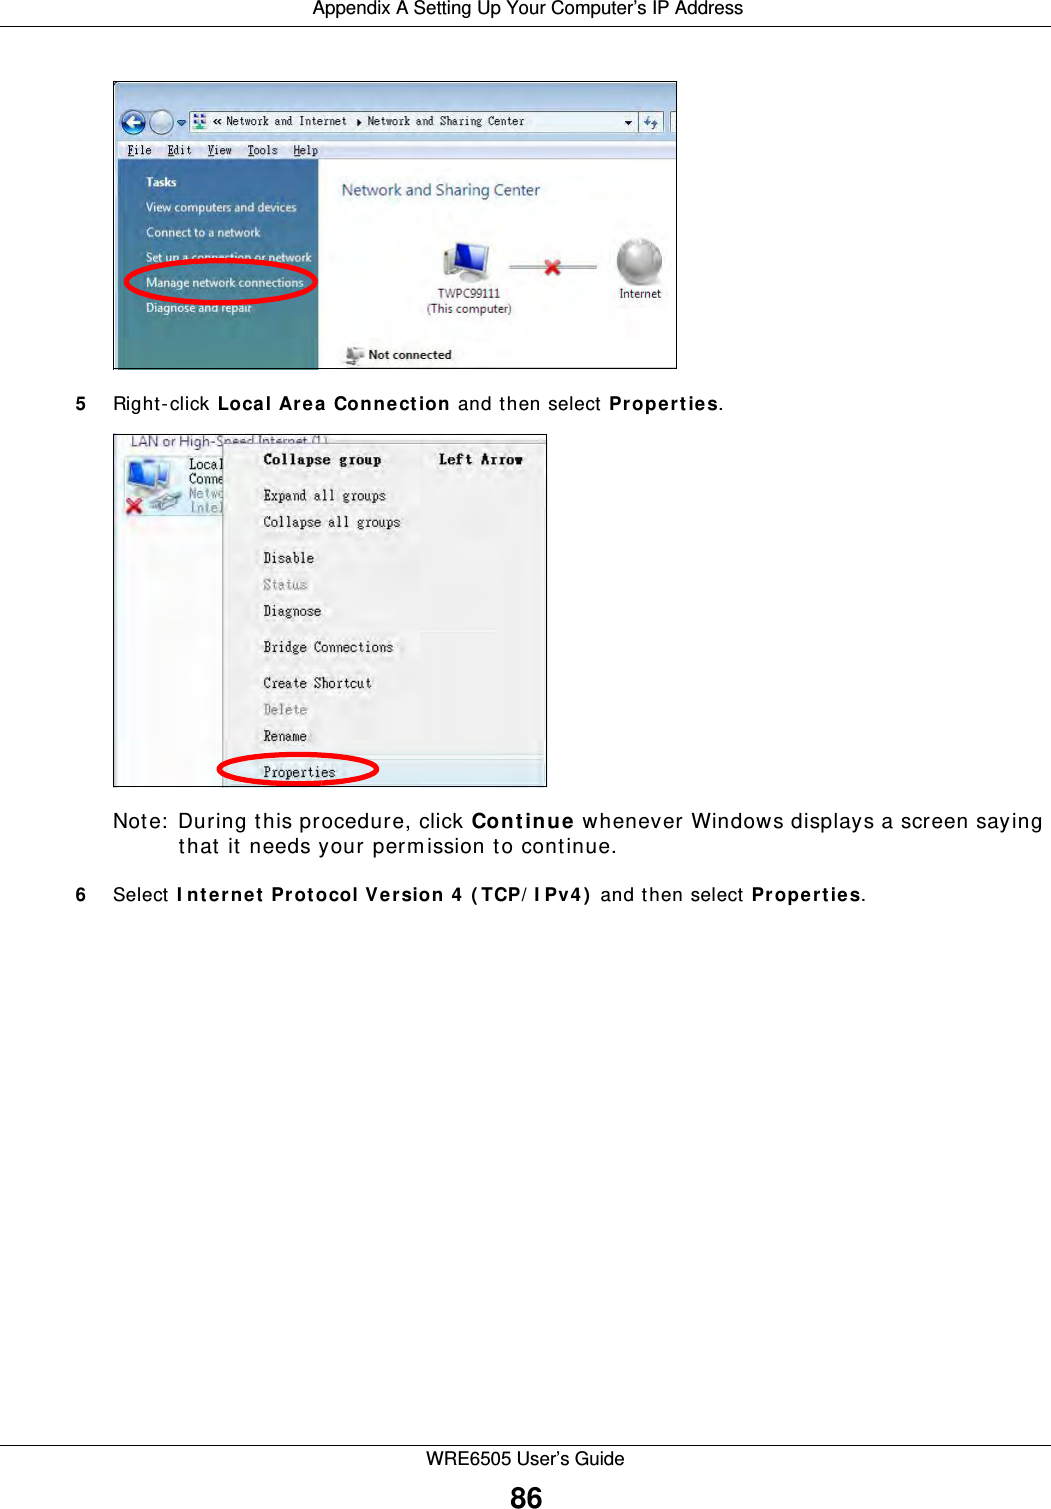  Appendix A Setting Up Your Computer’s IP AddressWRE6505 User’s Guide865Right- click Local Ar ea Conn ect ion and then select Pr ope r t ie s.Note:  During this procedure, click Cont inue  whenever Windows displays a screen saying that it needs your perm ission to continue.6Select I nt e rne t  Prot ocol Ver sion 4  ( TCP/ I Pv4 )  and then select Pr op e rt ie s.